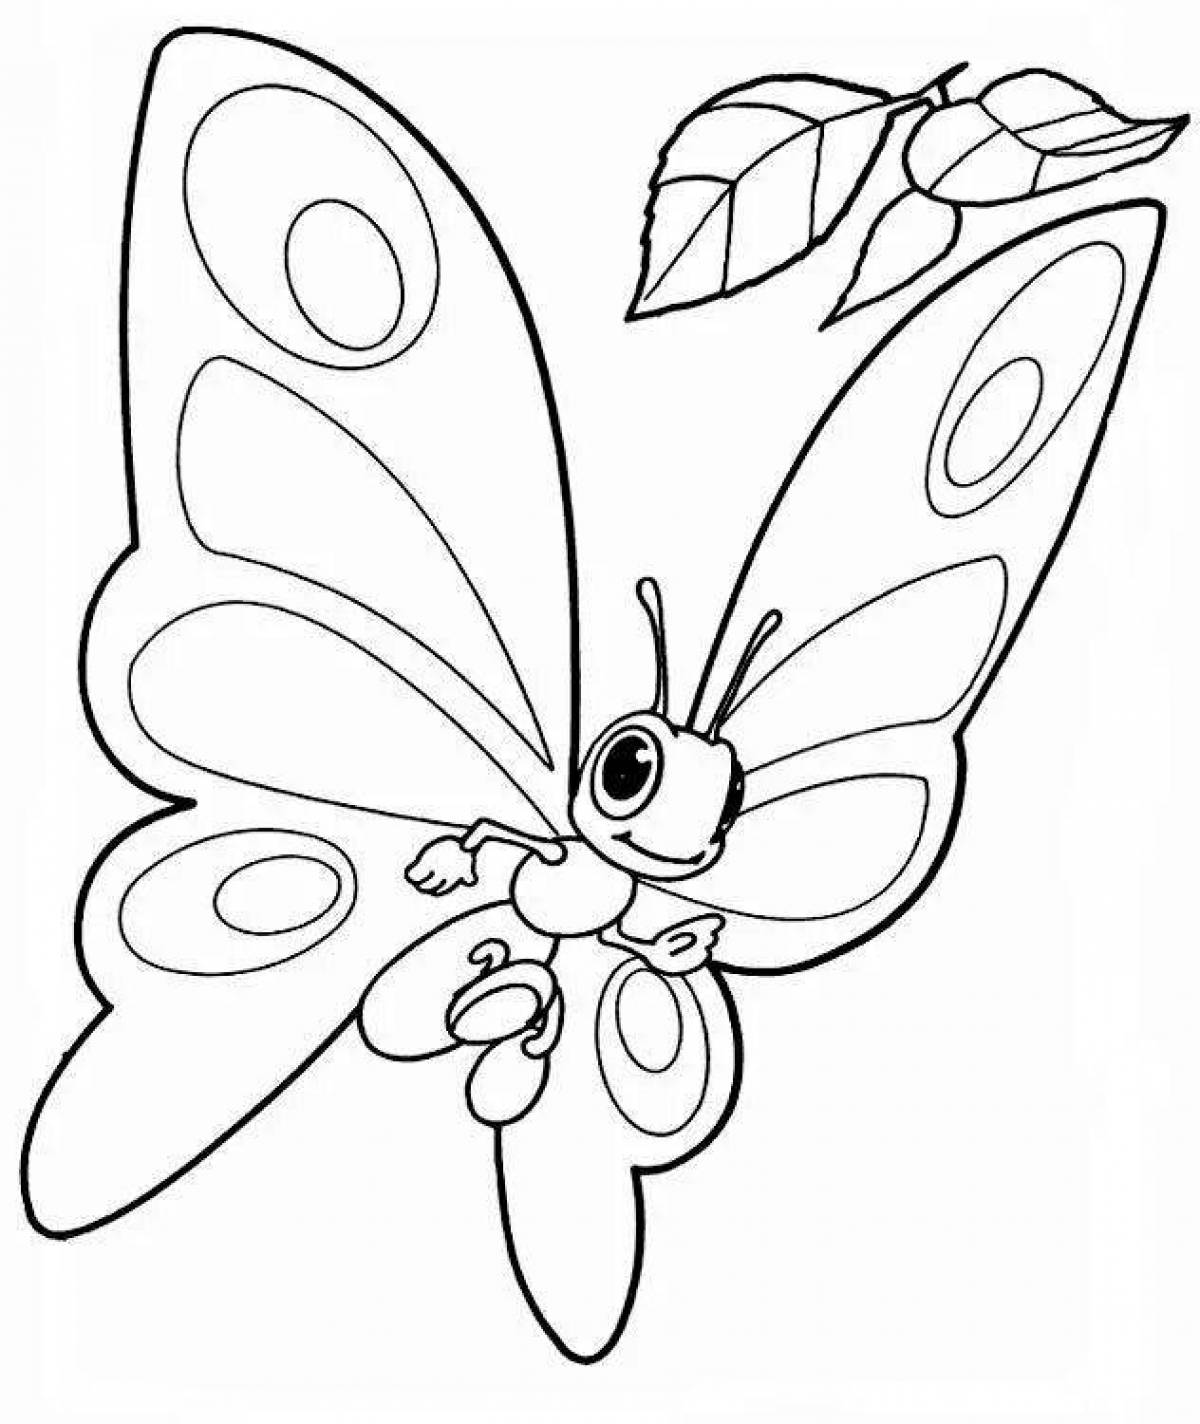 Insect coloring book for 4-5 year olds